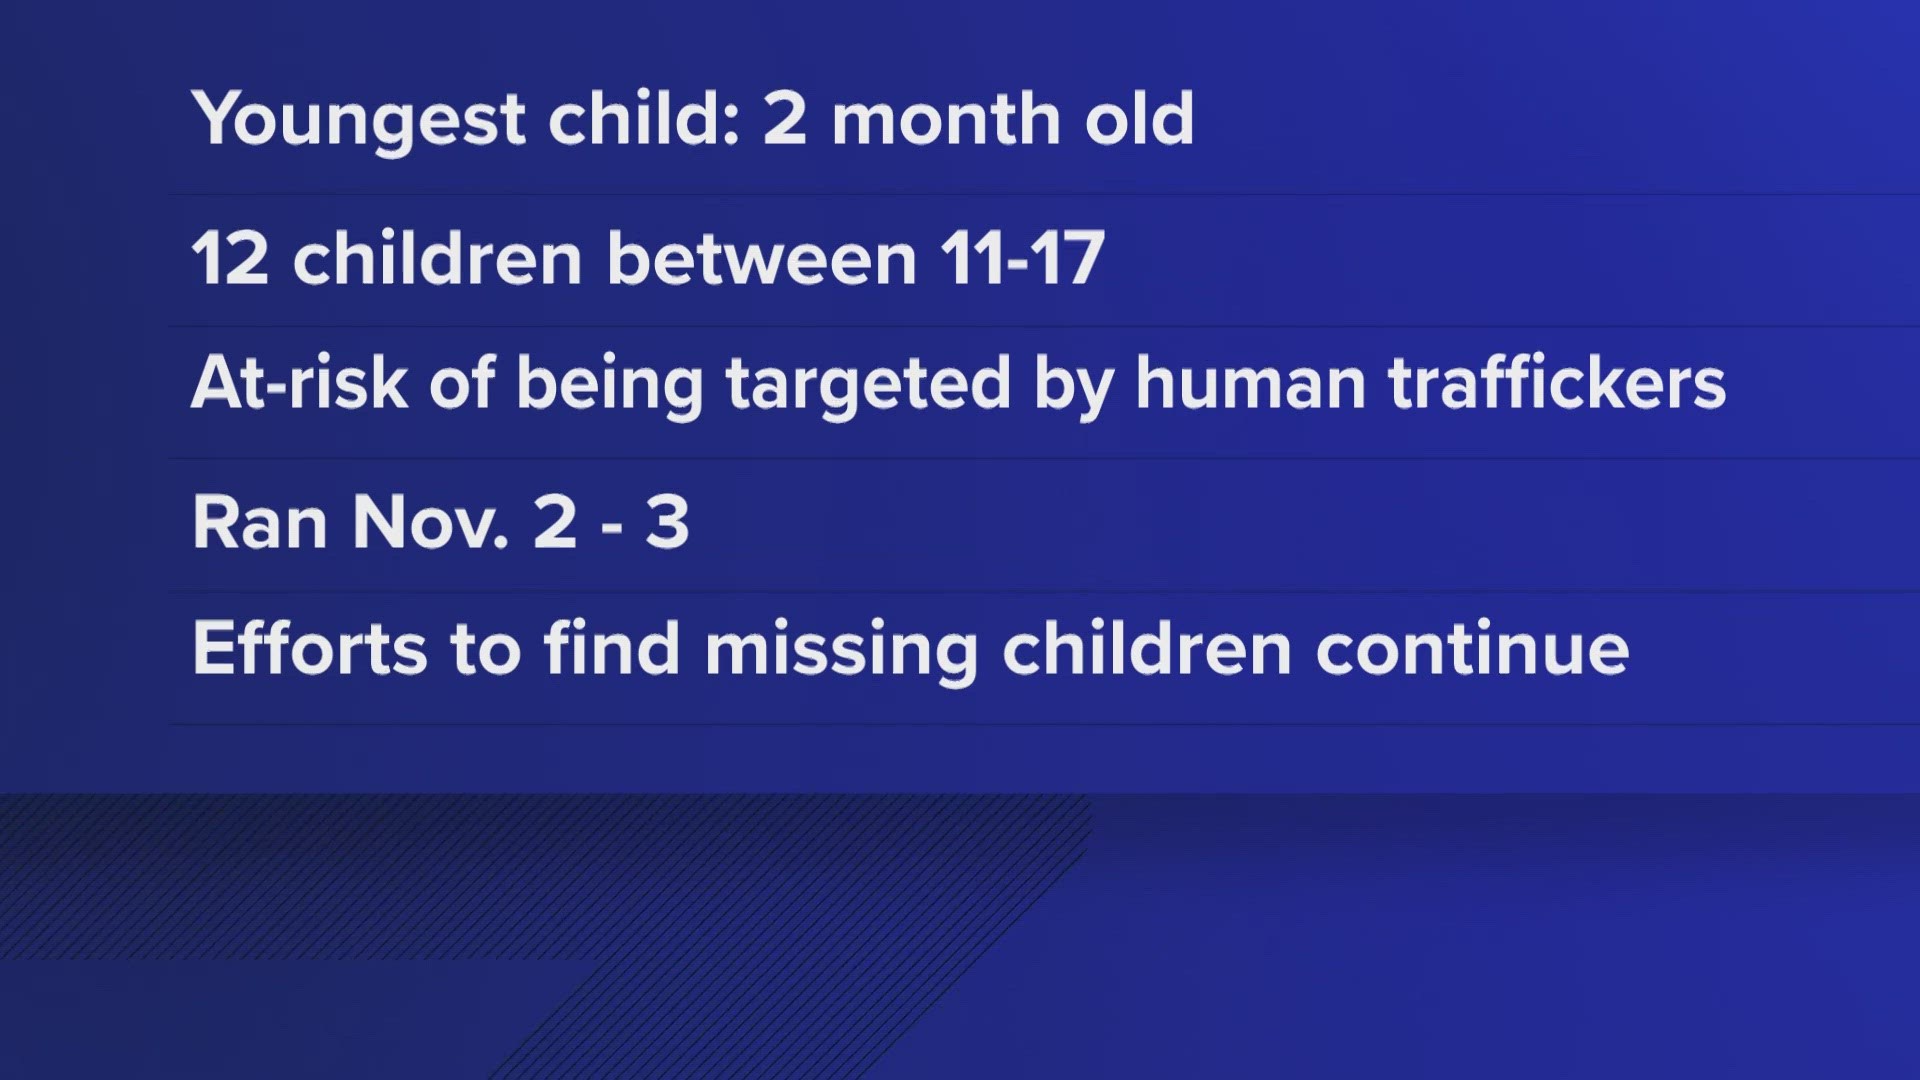 The Tennessee Bureau of Investigation (TBI) said 13 missing Memphis area children have been found after ‘Operation Not for Sale,’ targeting those at risk.